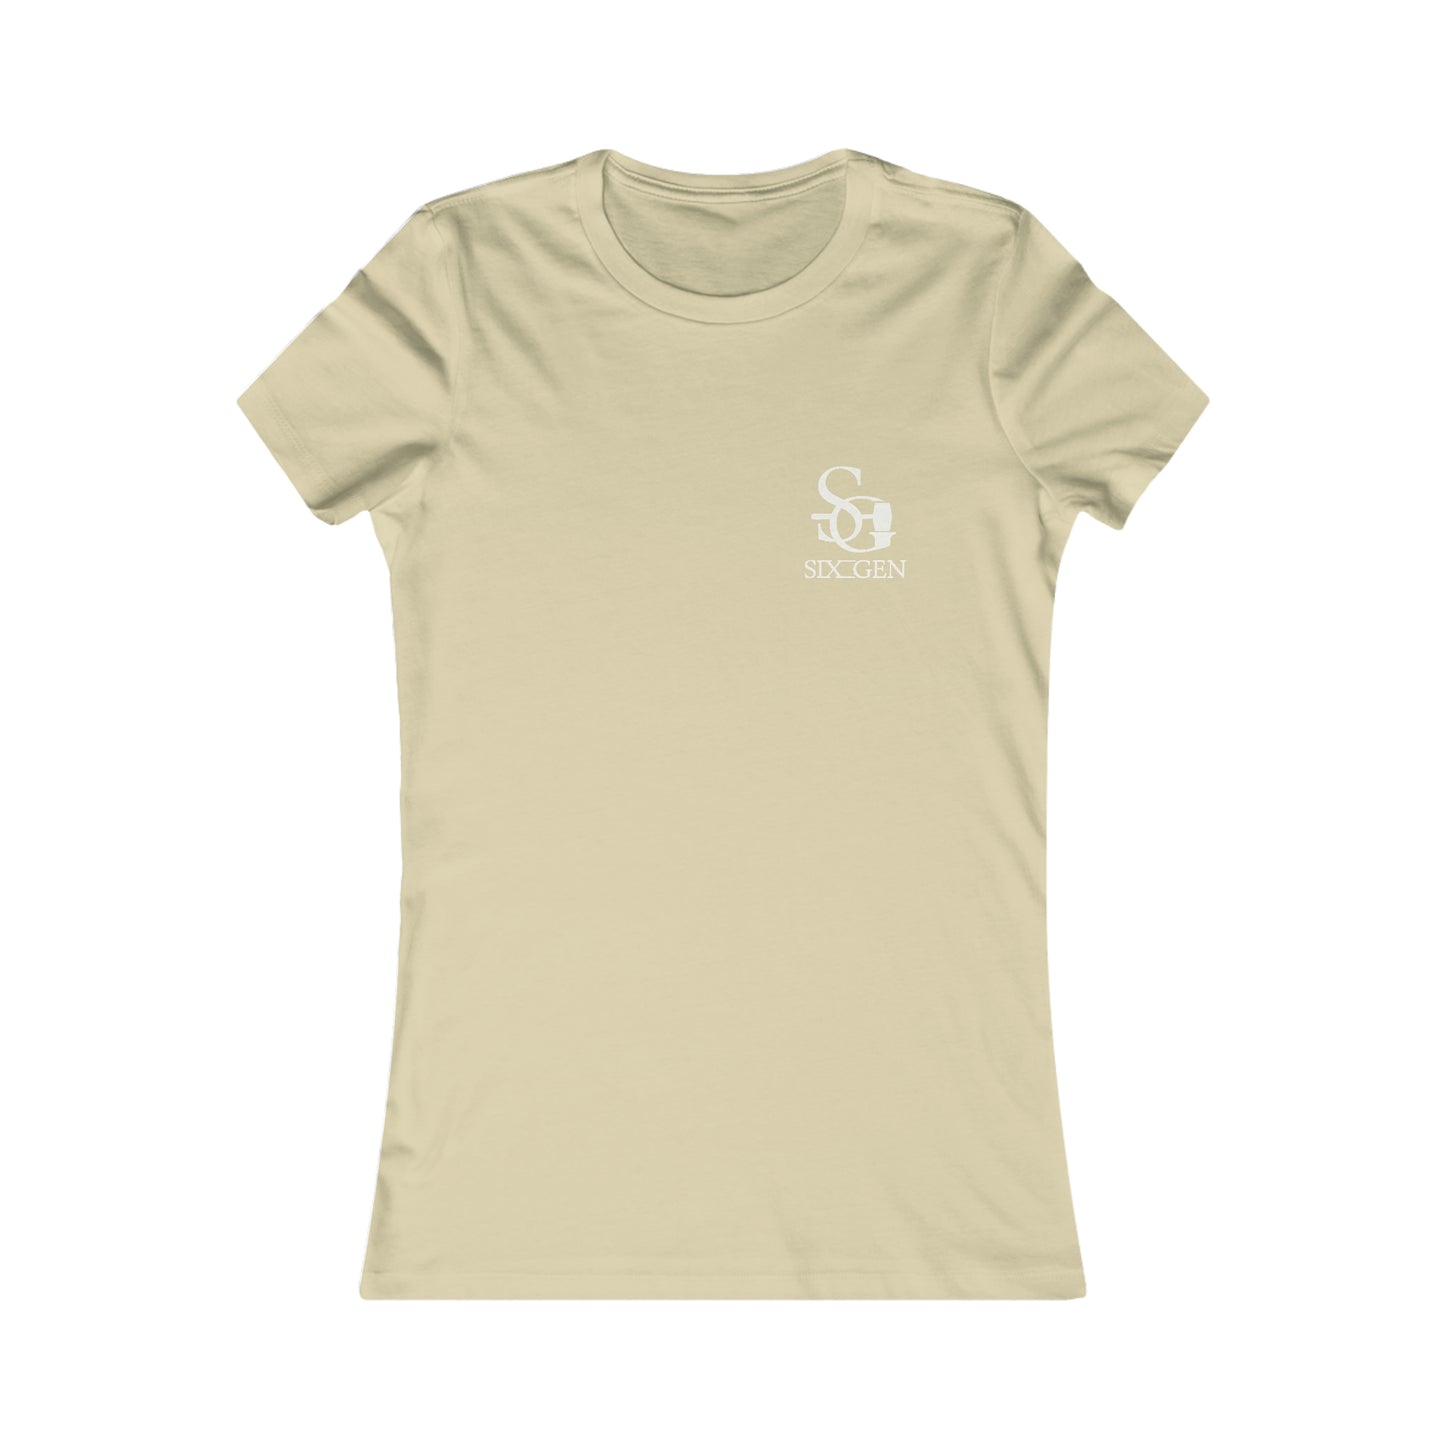 Women's Tee with Six-Gen Forge